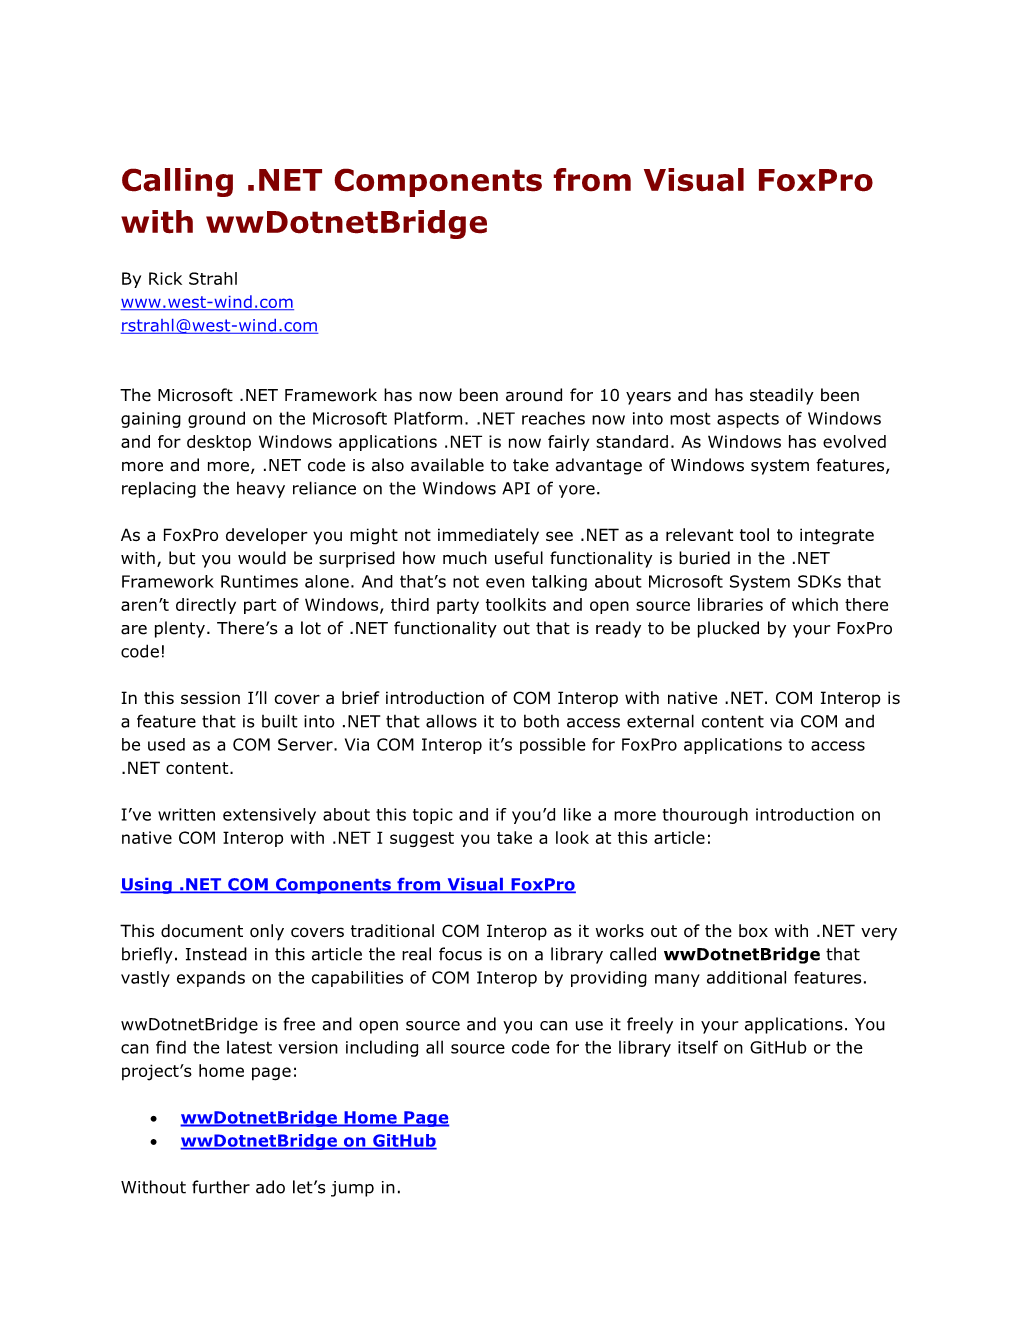 Calling .NET Components from Visual Foxpro with Wwdotnetbridge